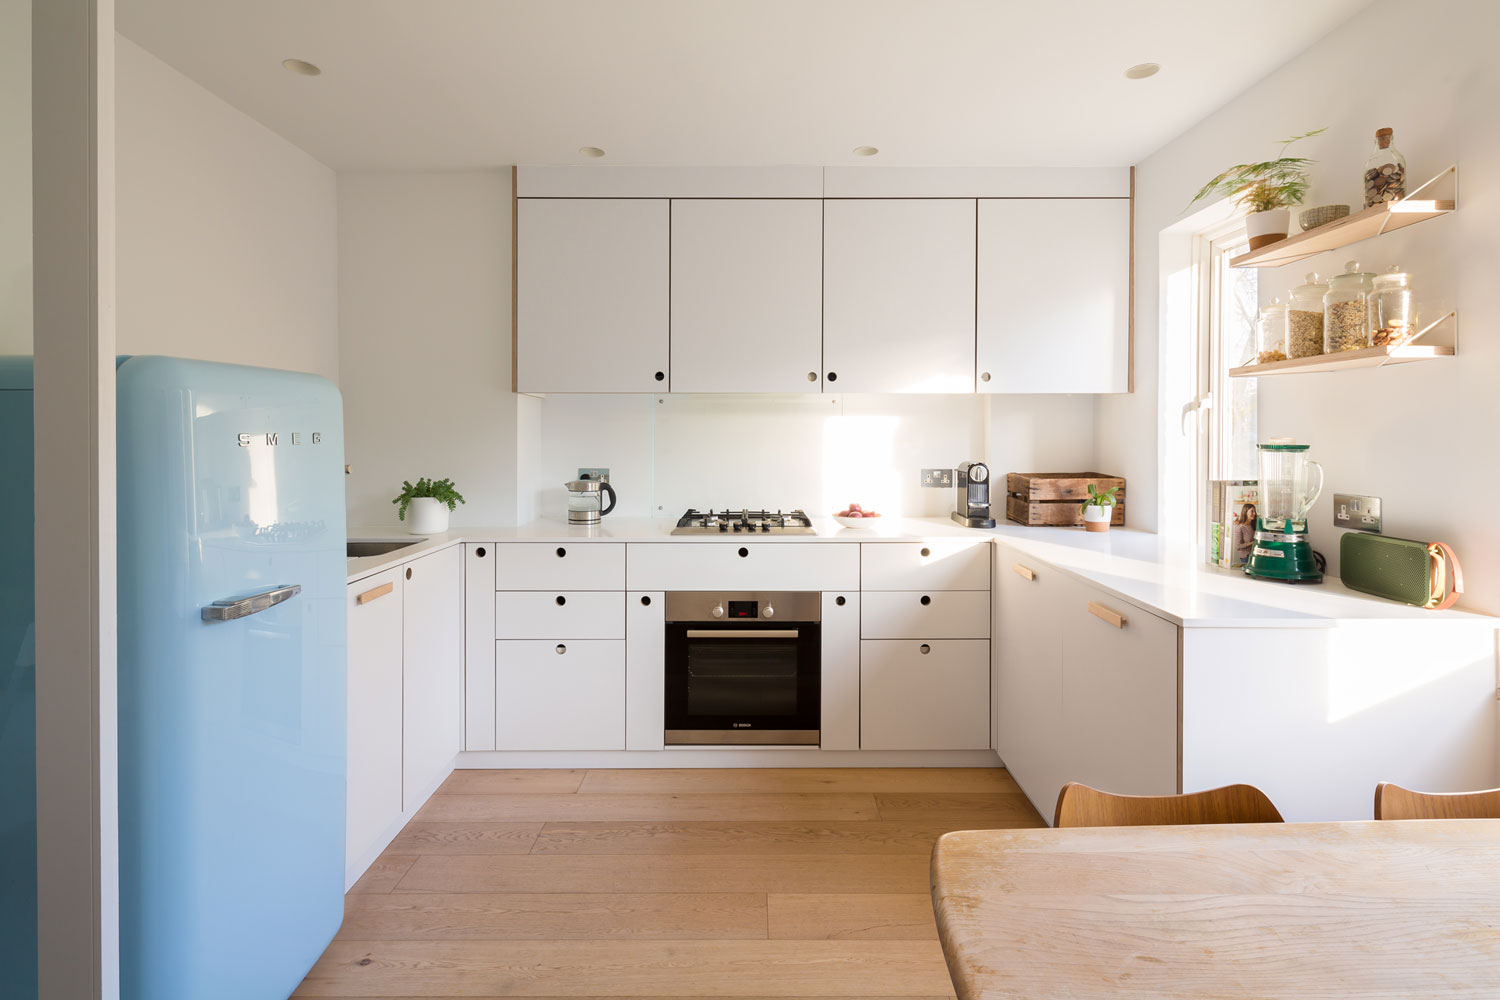 When-Not-To-Scrimp-on-Your-Renovation-PoulsomMiddlehurst_Lonsdale-Kitchen